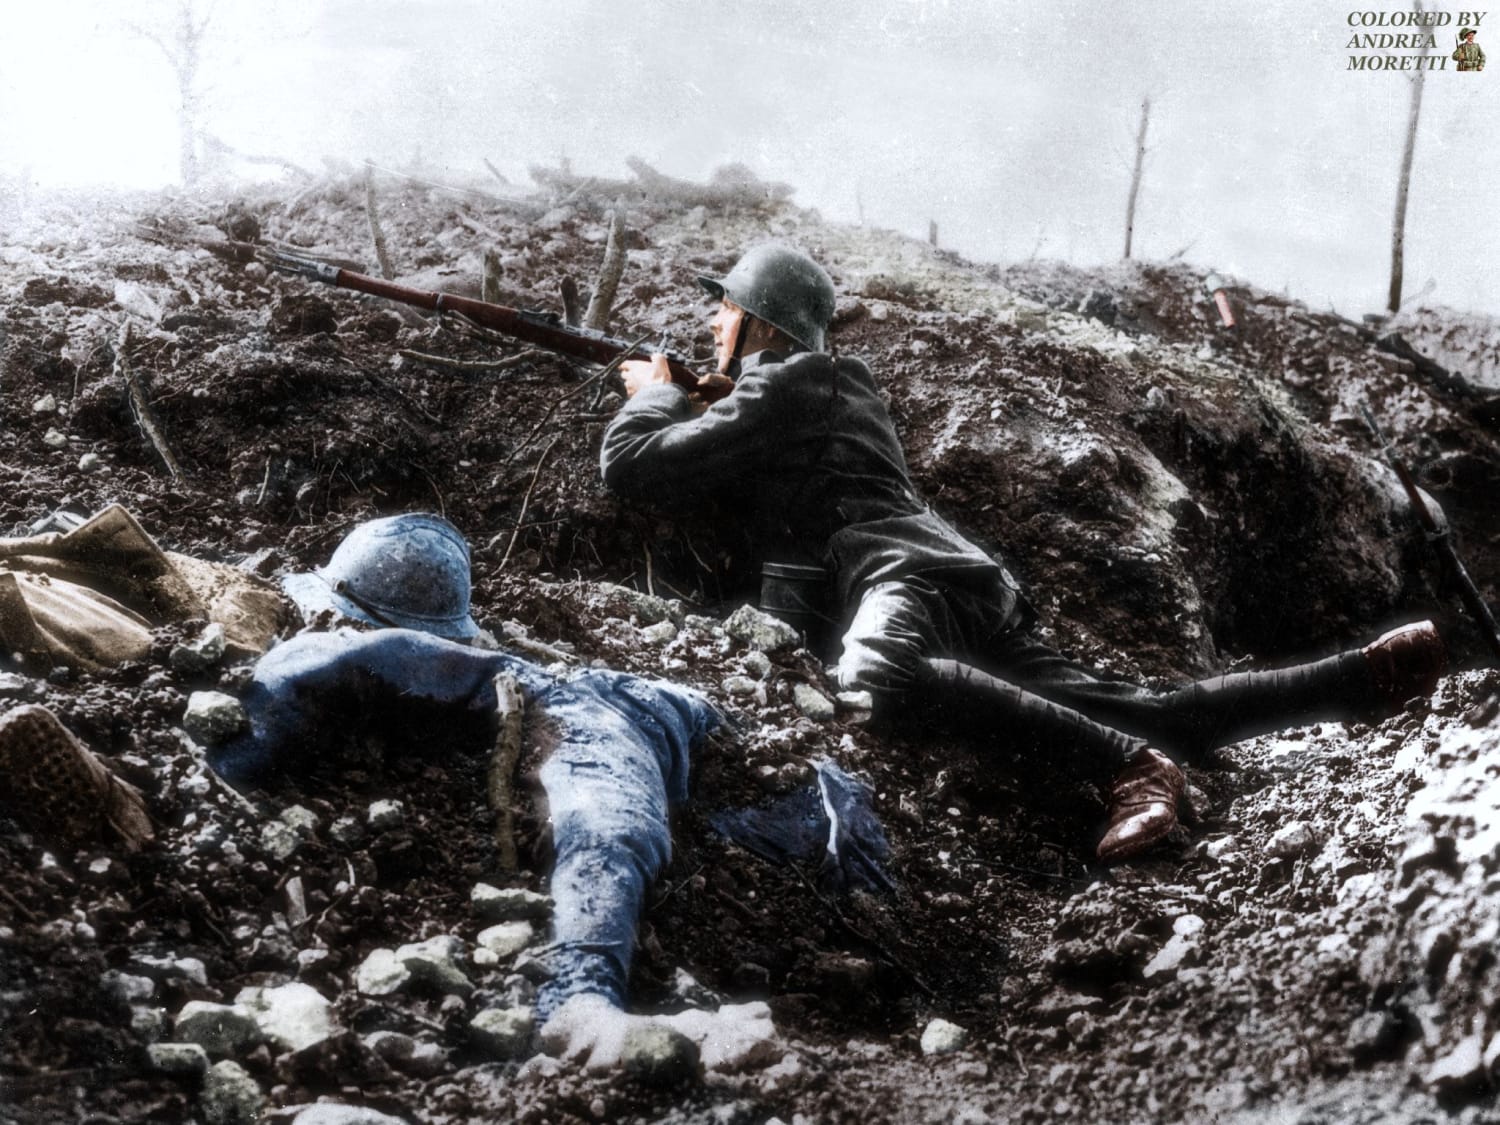 German rifleman beside the corpse of a French soldier in a trench at Fort Vaux (colored by me), France, 1916